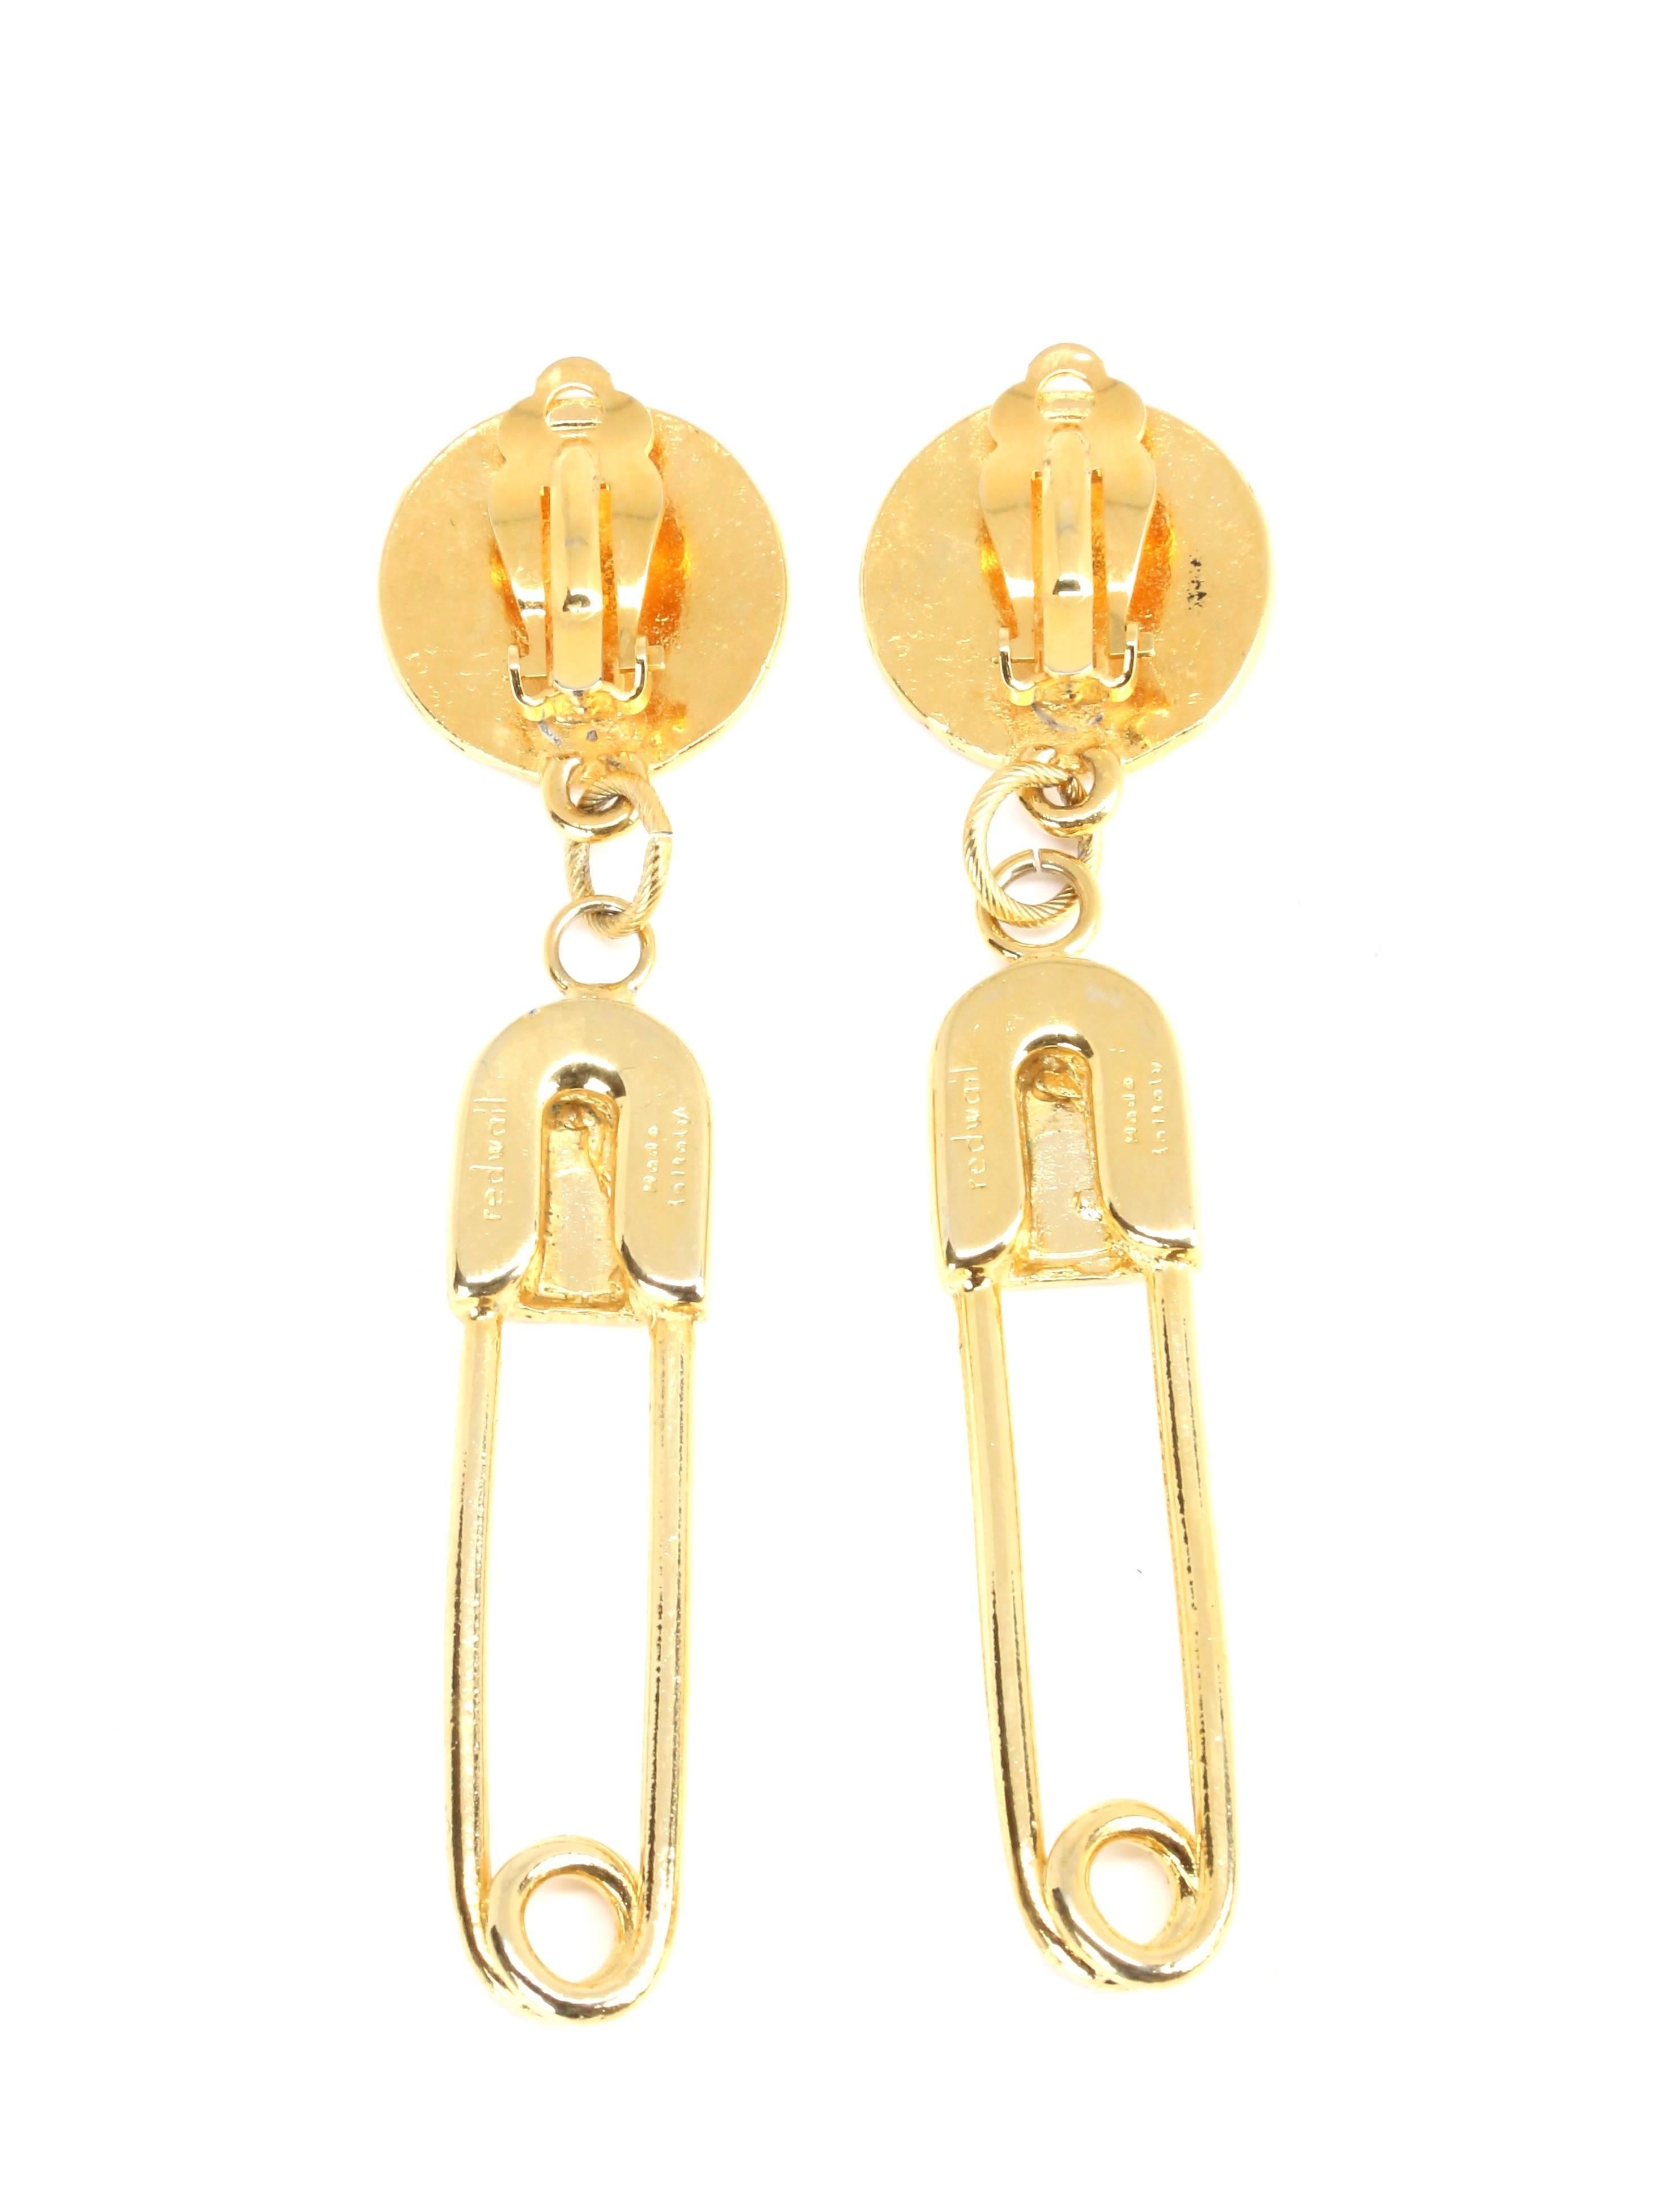 
Long gilt earrings with safety pin motif from Moschino dating to the early 1990's. Measure approximately 3.33